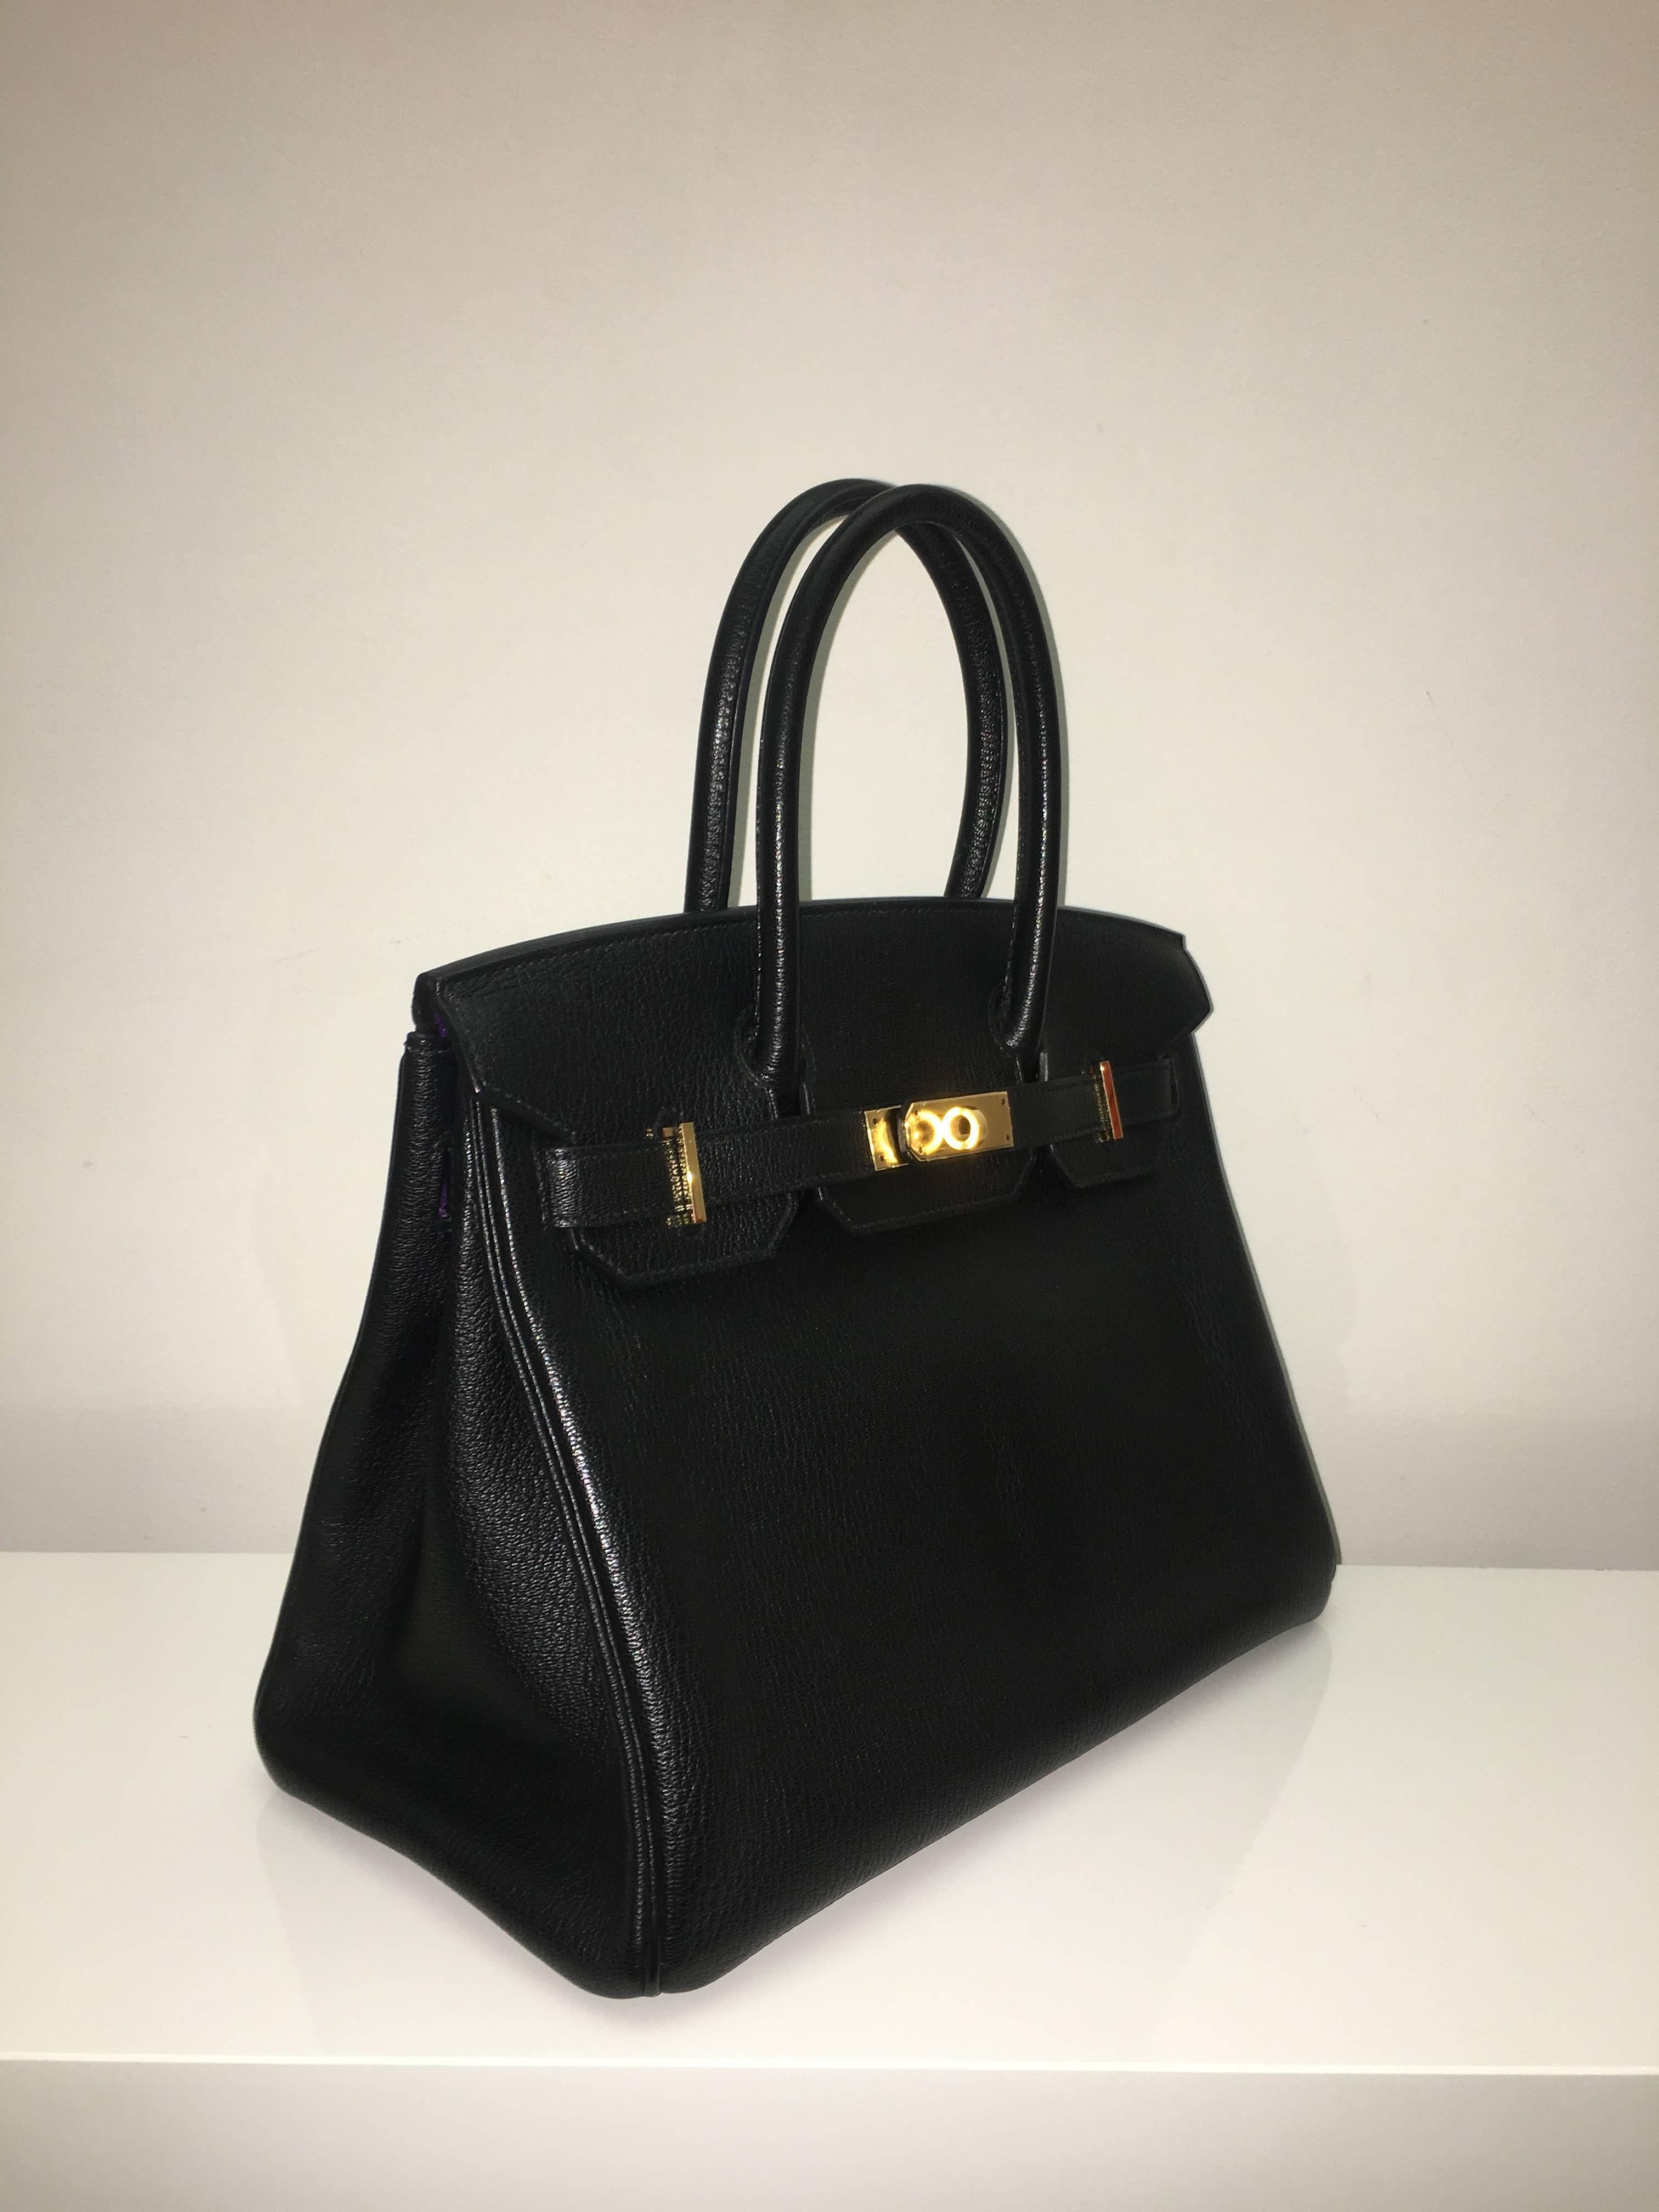 Hermes 
Birkin Size 30
Togo Leather 
Colour Black- Chevre
Gold Hardware 
store fresh, comes with receipt and full set (dust bag, box...) 
Hydeparkfashion specializes in sourcing and delivering authentic luxury handbags, mainly Hermes, to